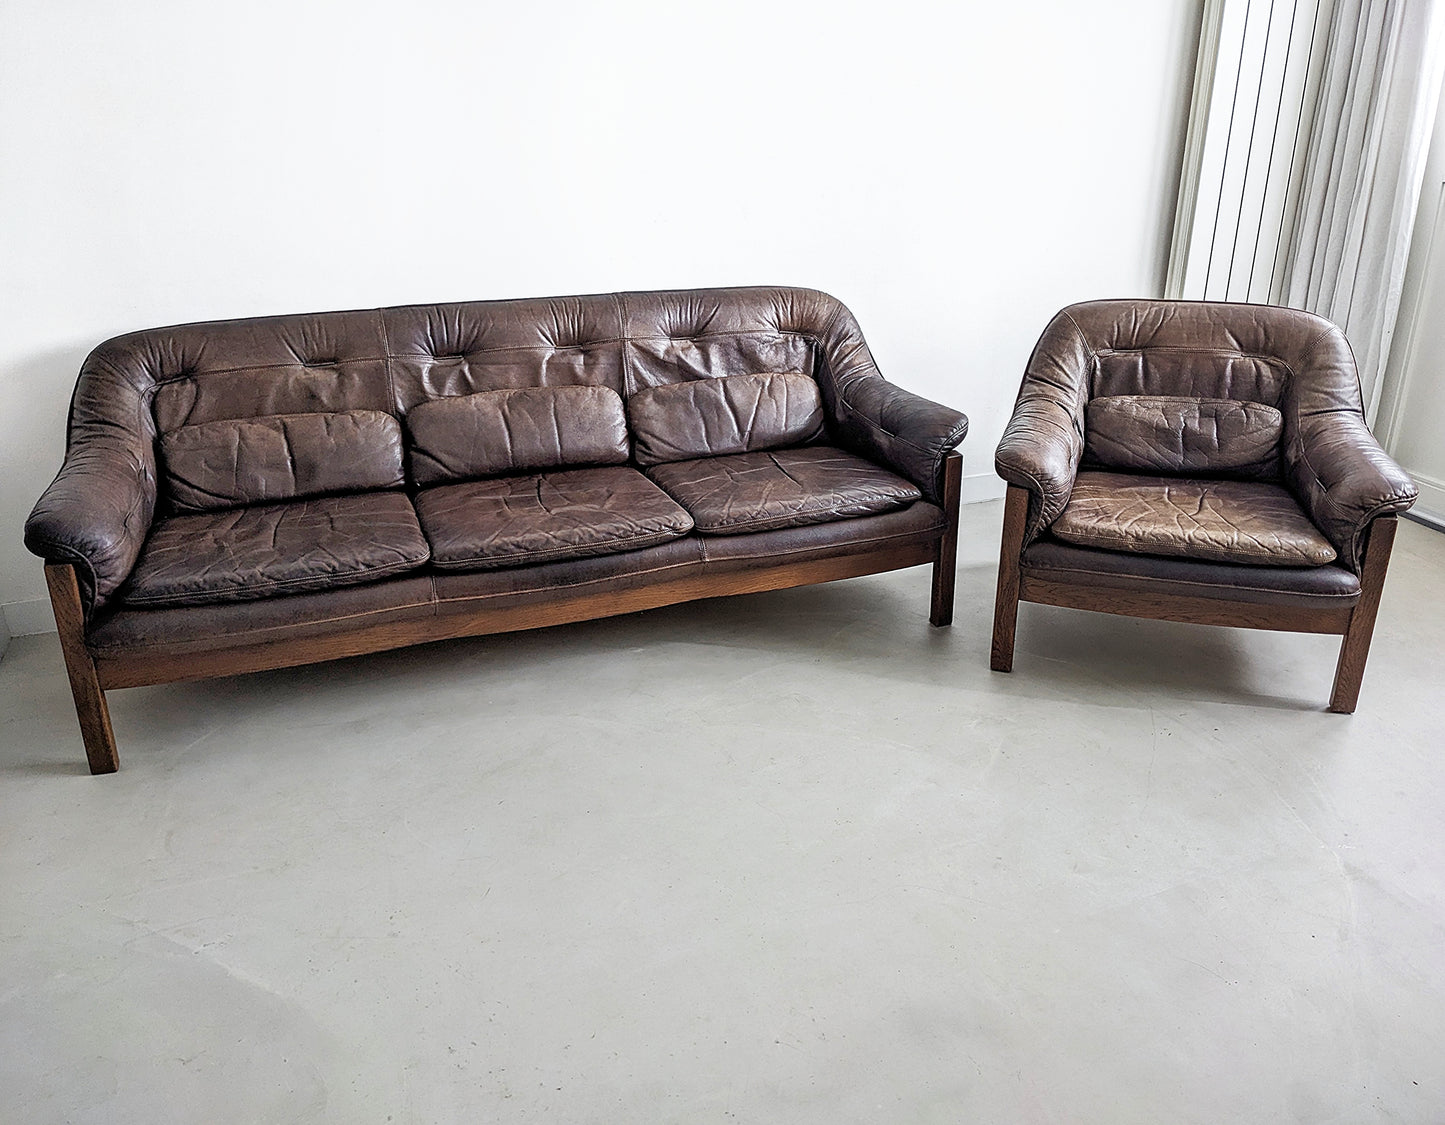 Brutalist Set of Leather Sofa & Loungechair by Hain & Thome 1970's